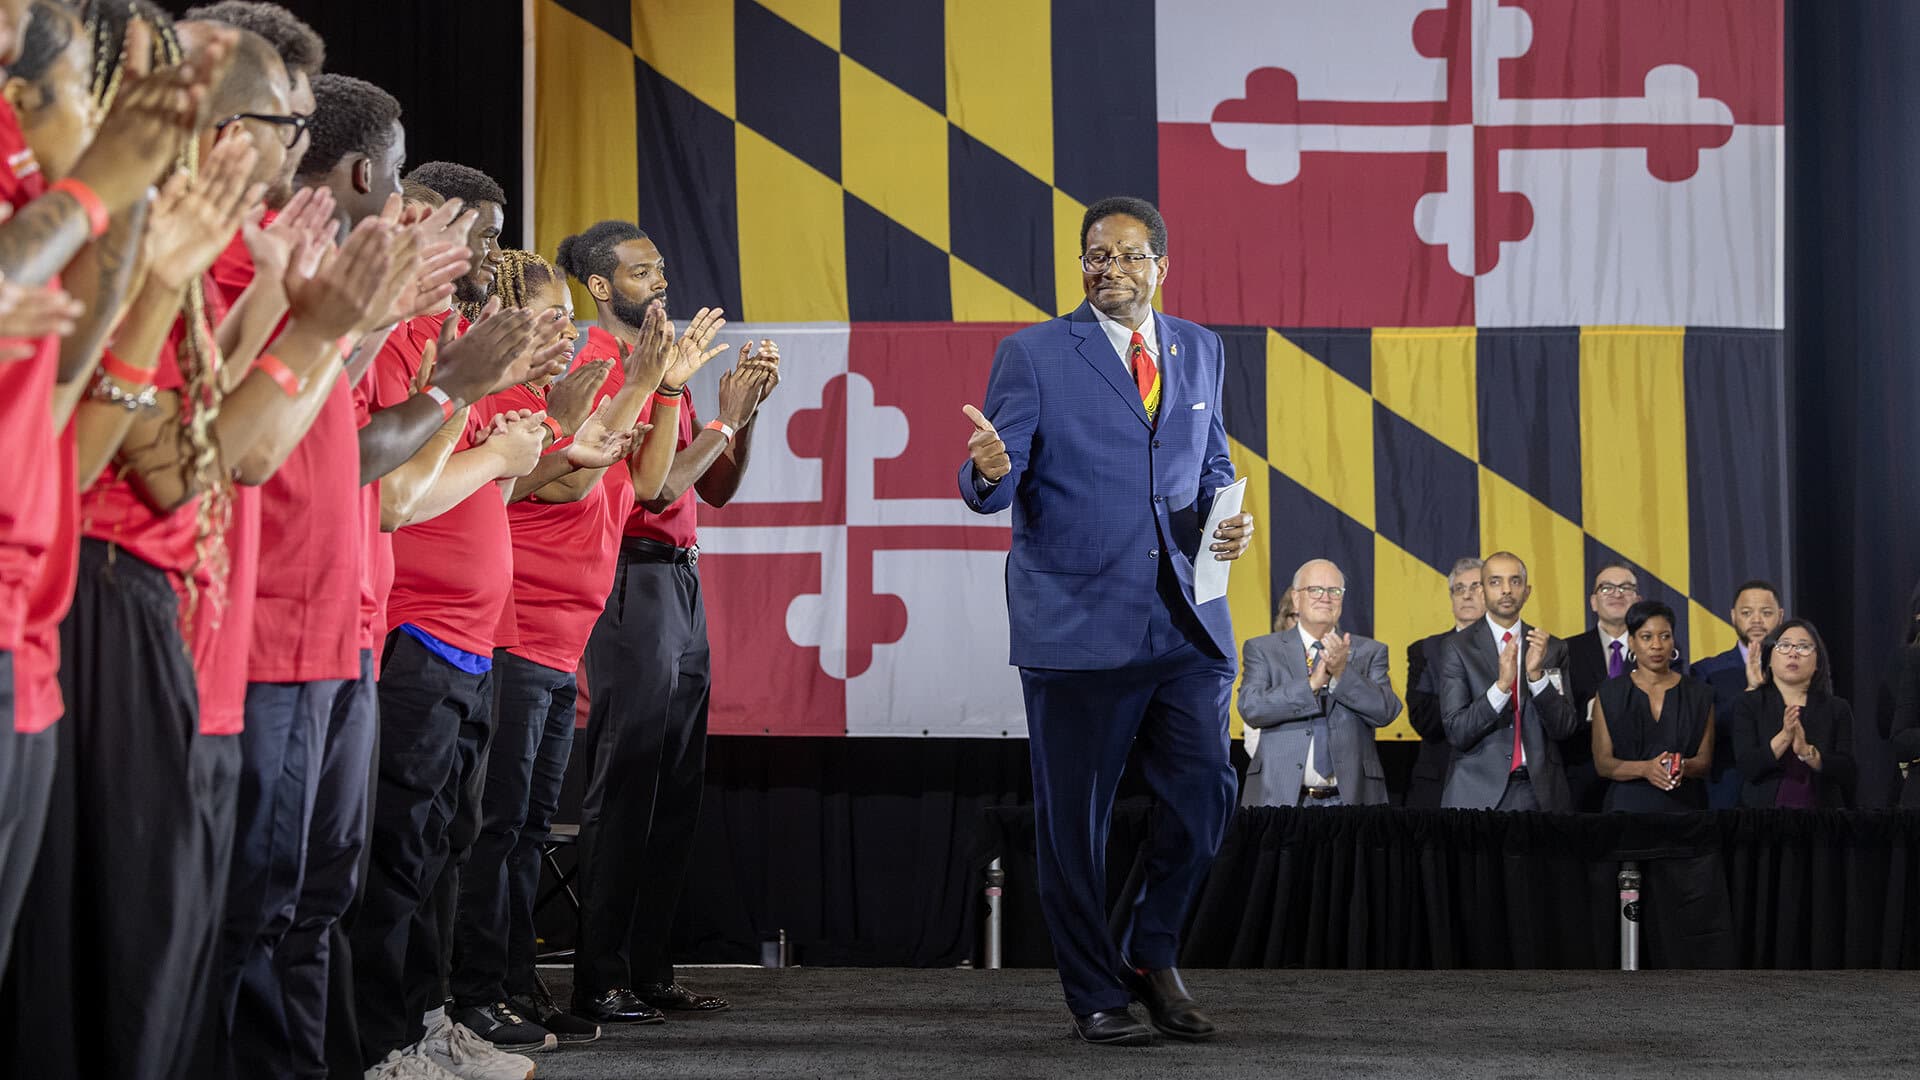 man on stage in front of giant Maryland flag gives thumbs-up sign to a line young people